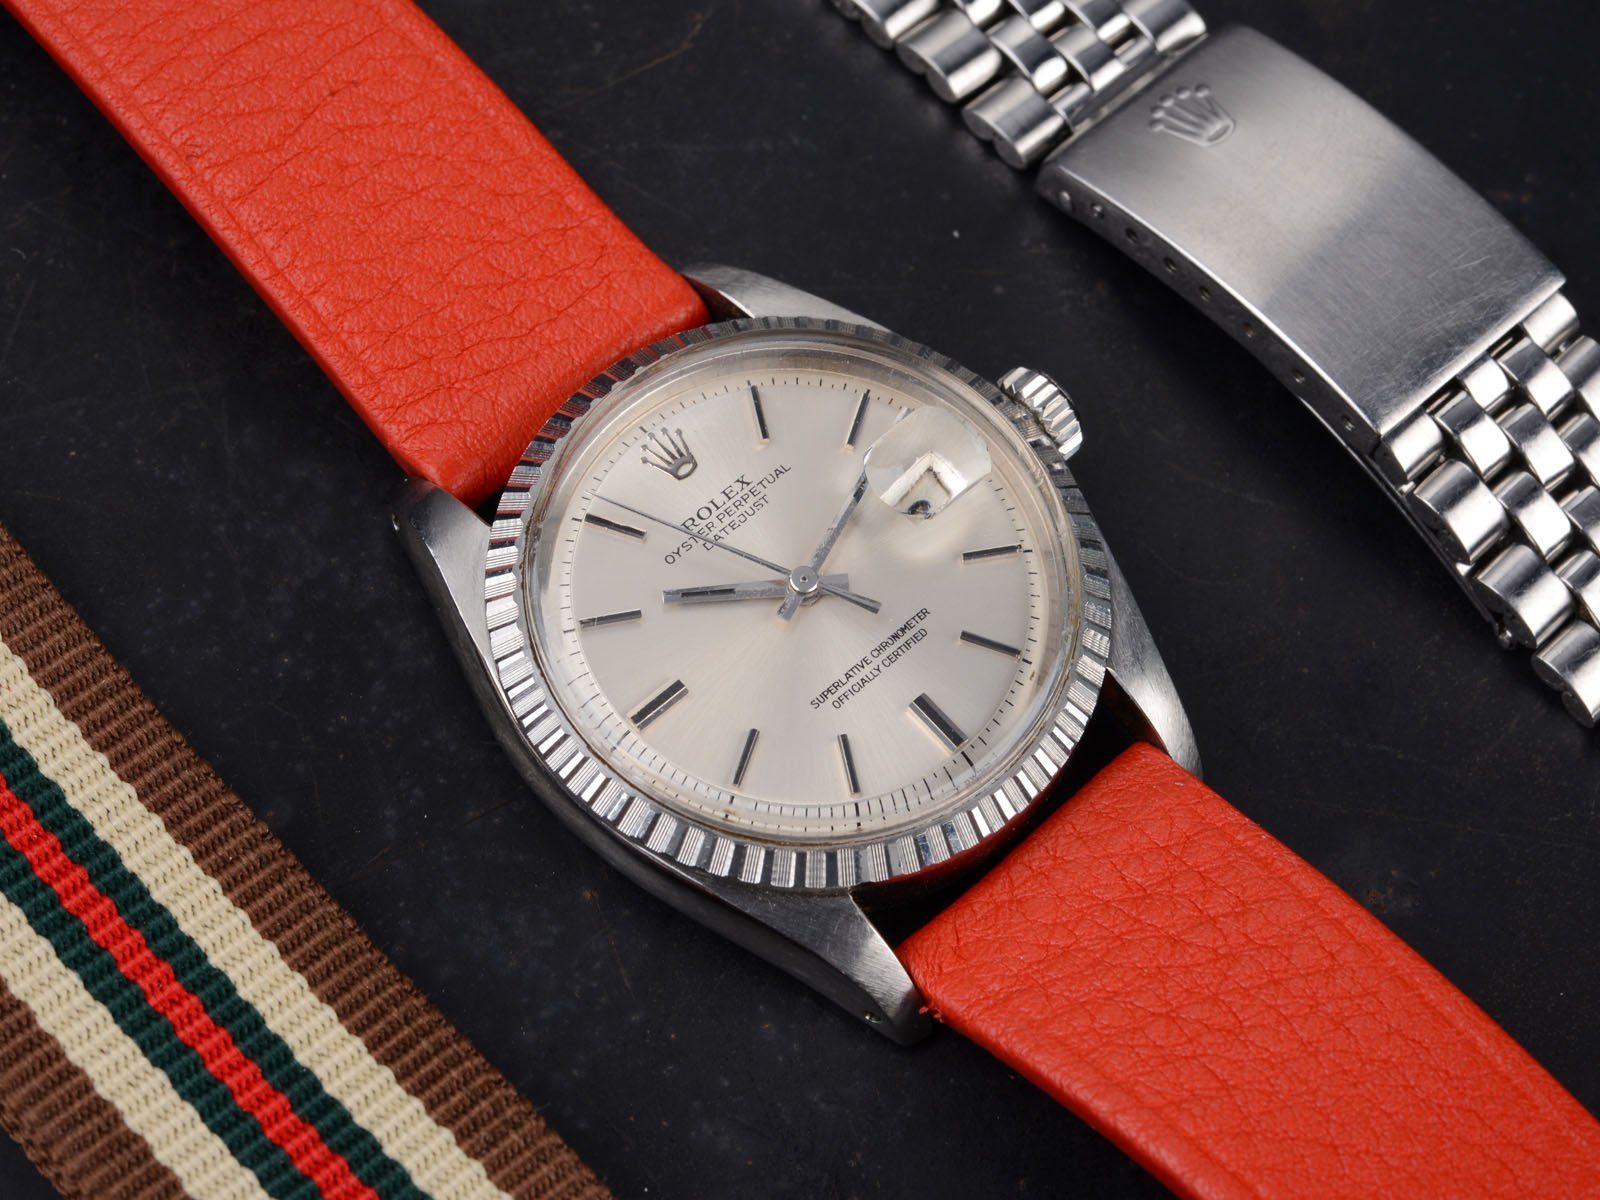 ROLEX 1603 DATEJUST SILVER DIAL 1978